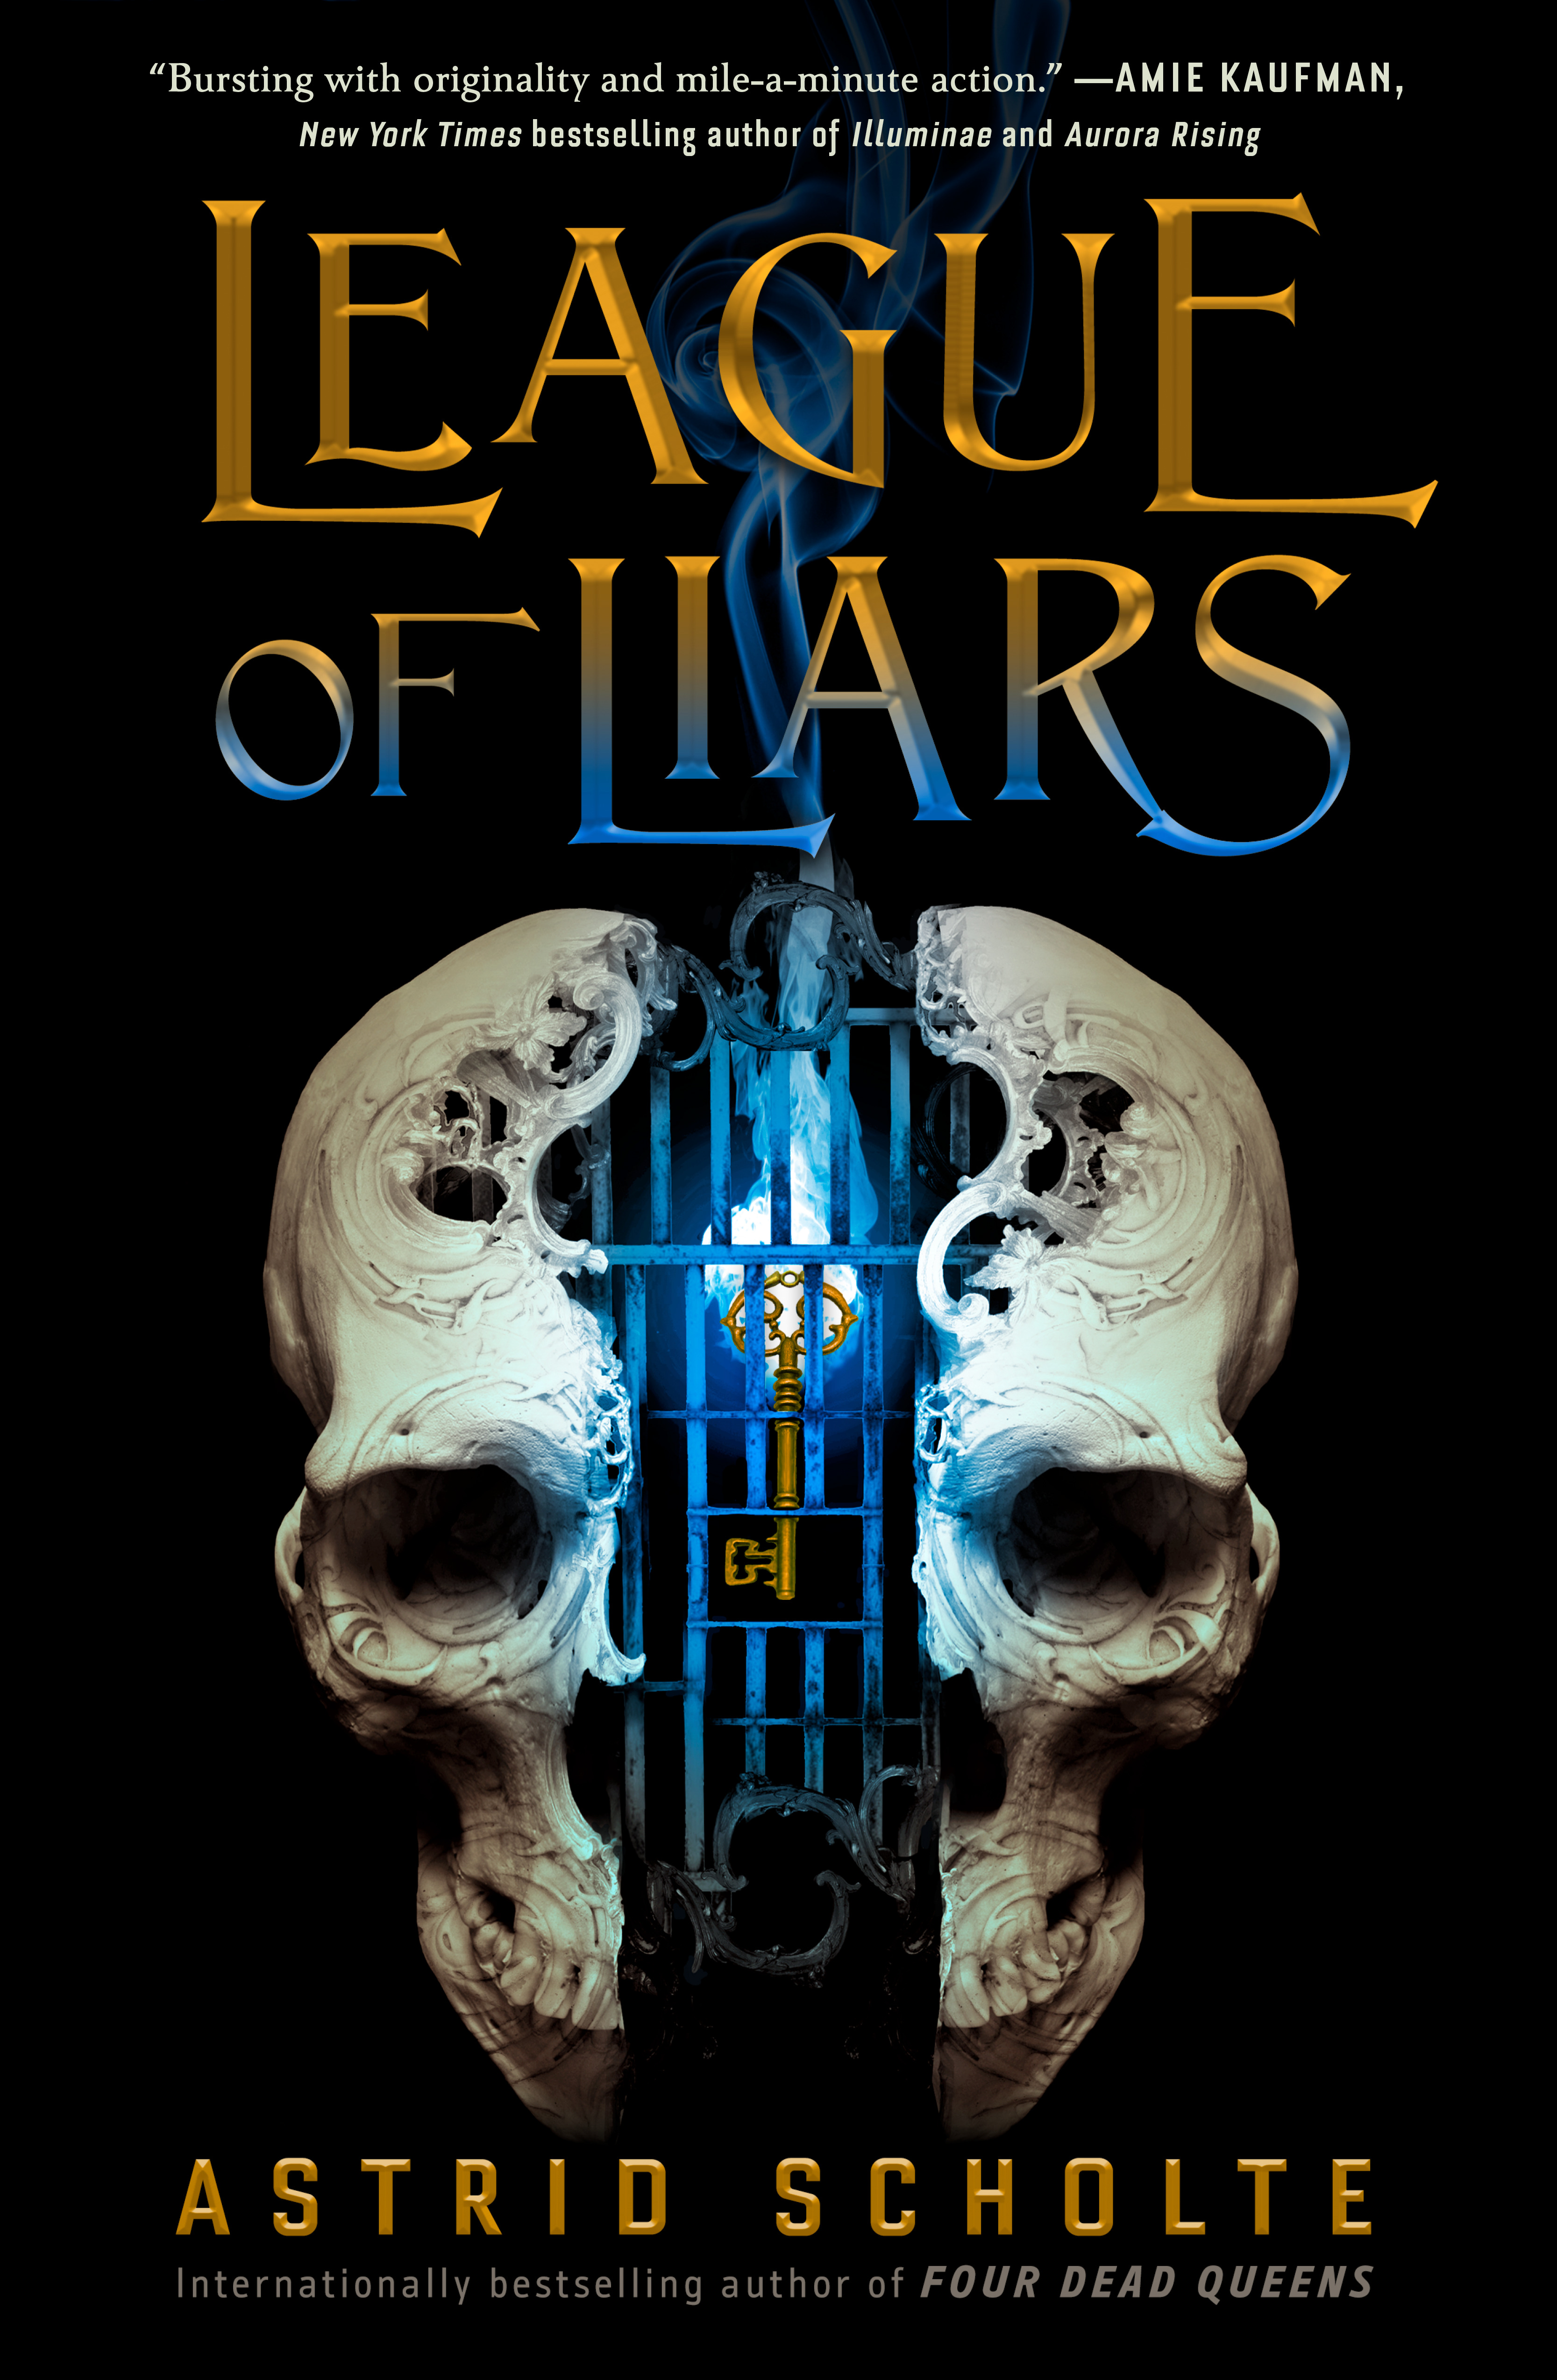 League of Liars | Scholte, Astrid